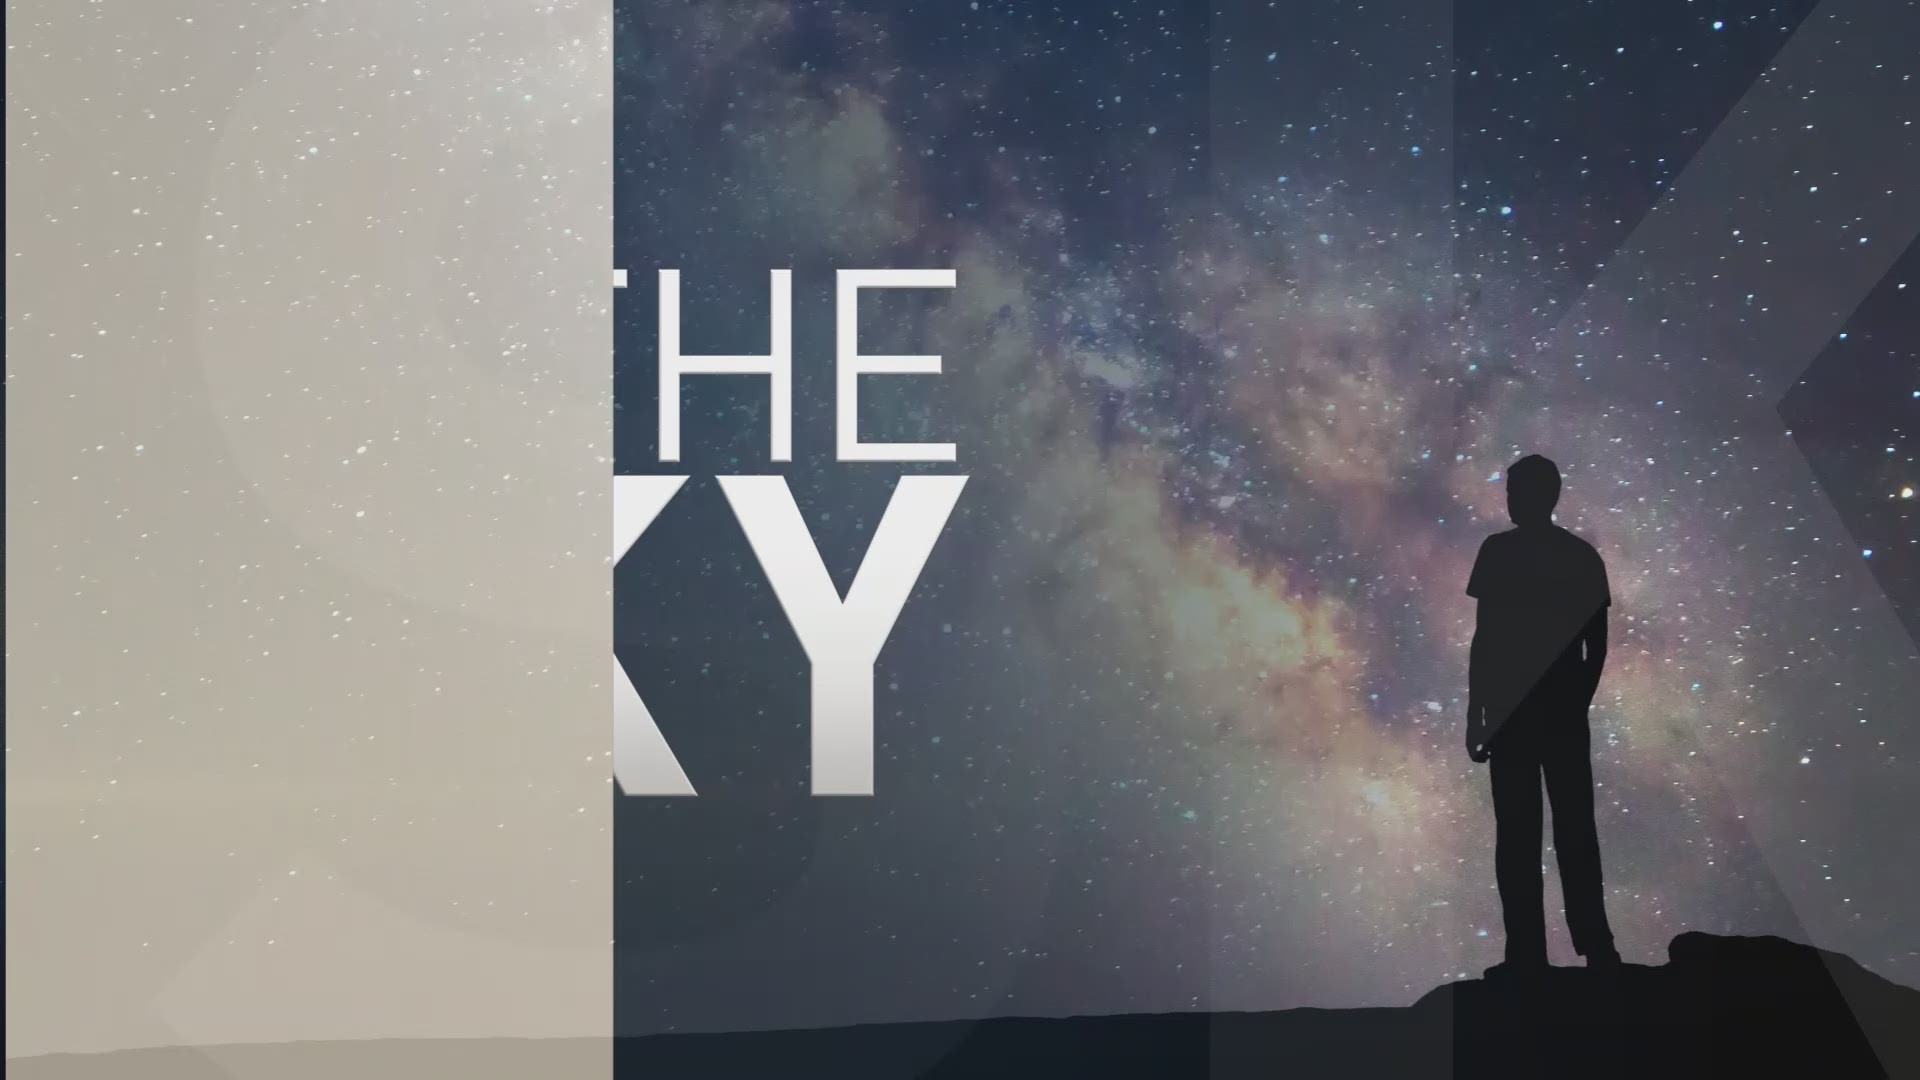 WATCH | Venus gives an amazing goodbye! Mercury is visible this week. Our Moon joins all the morning planets. It's "In the Sky" with Jay Reynolds and Gale Franko.